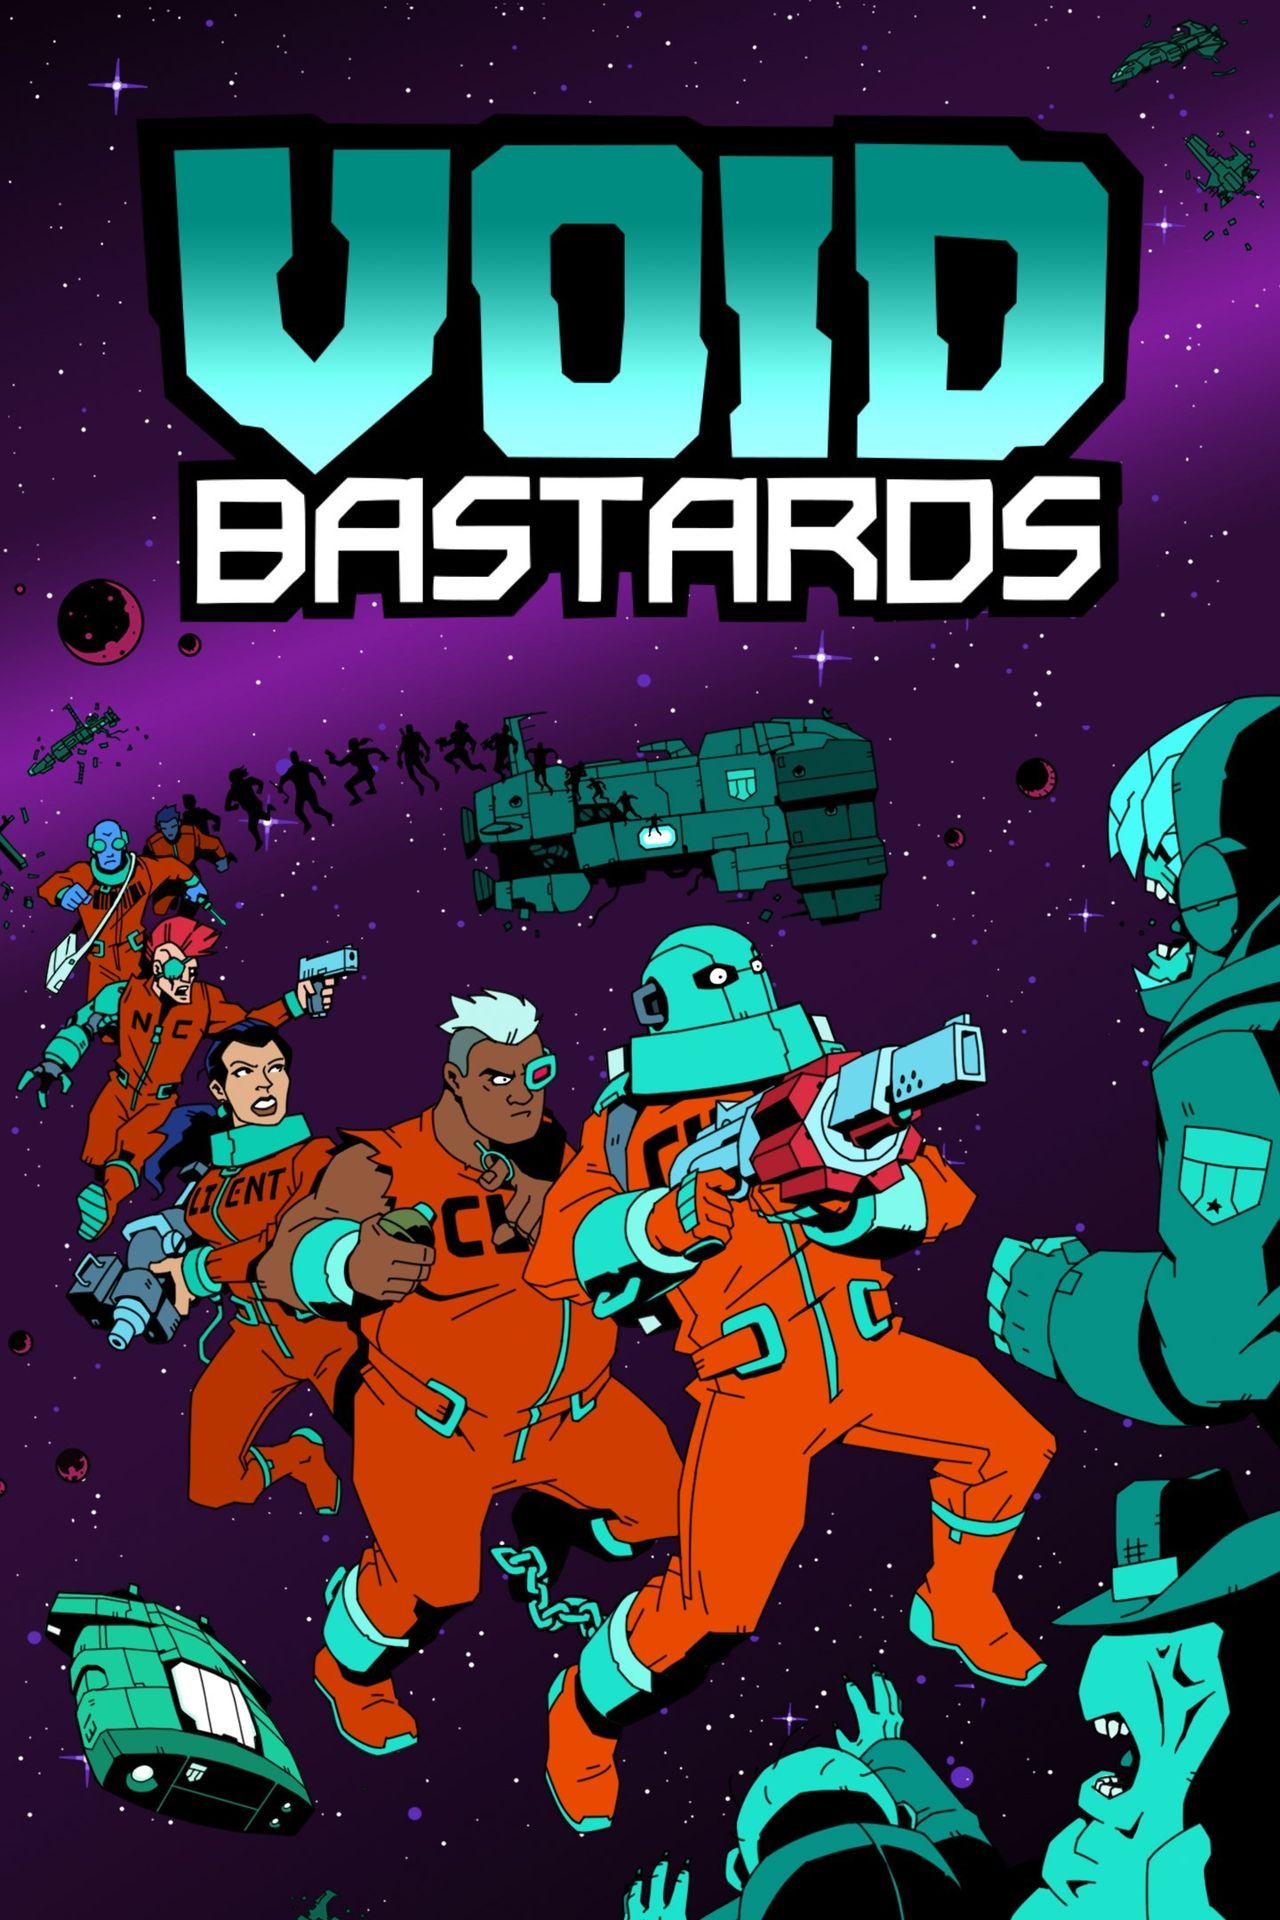 will void bastards come to ps4